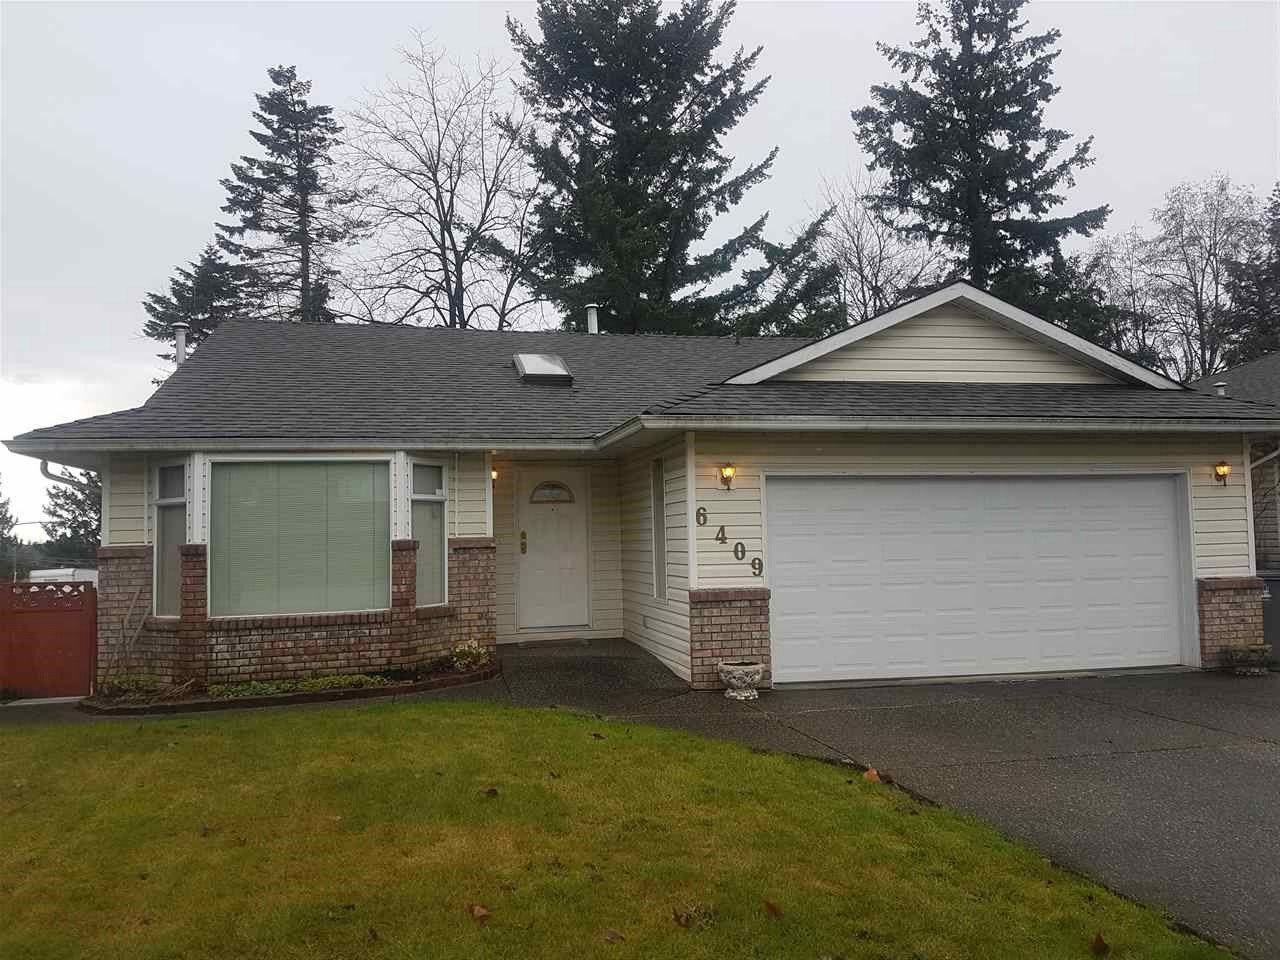 Main Photo: 6409 179 STREET in : Cloverdale BC House for sale : MLS®# R2235907